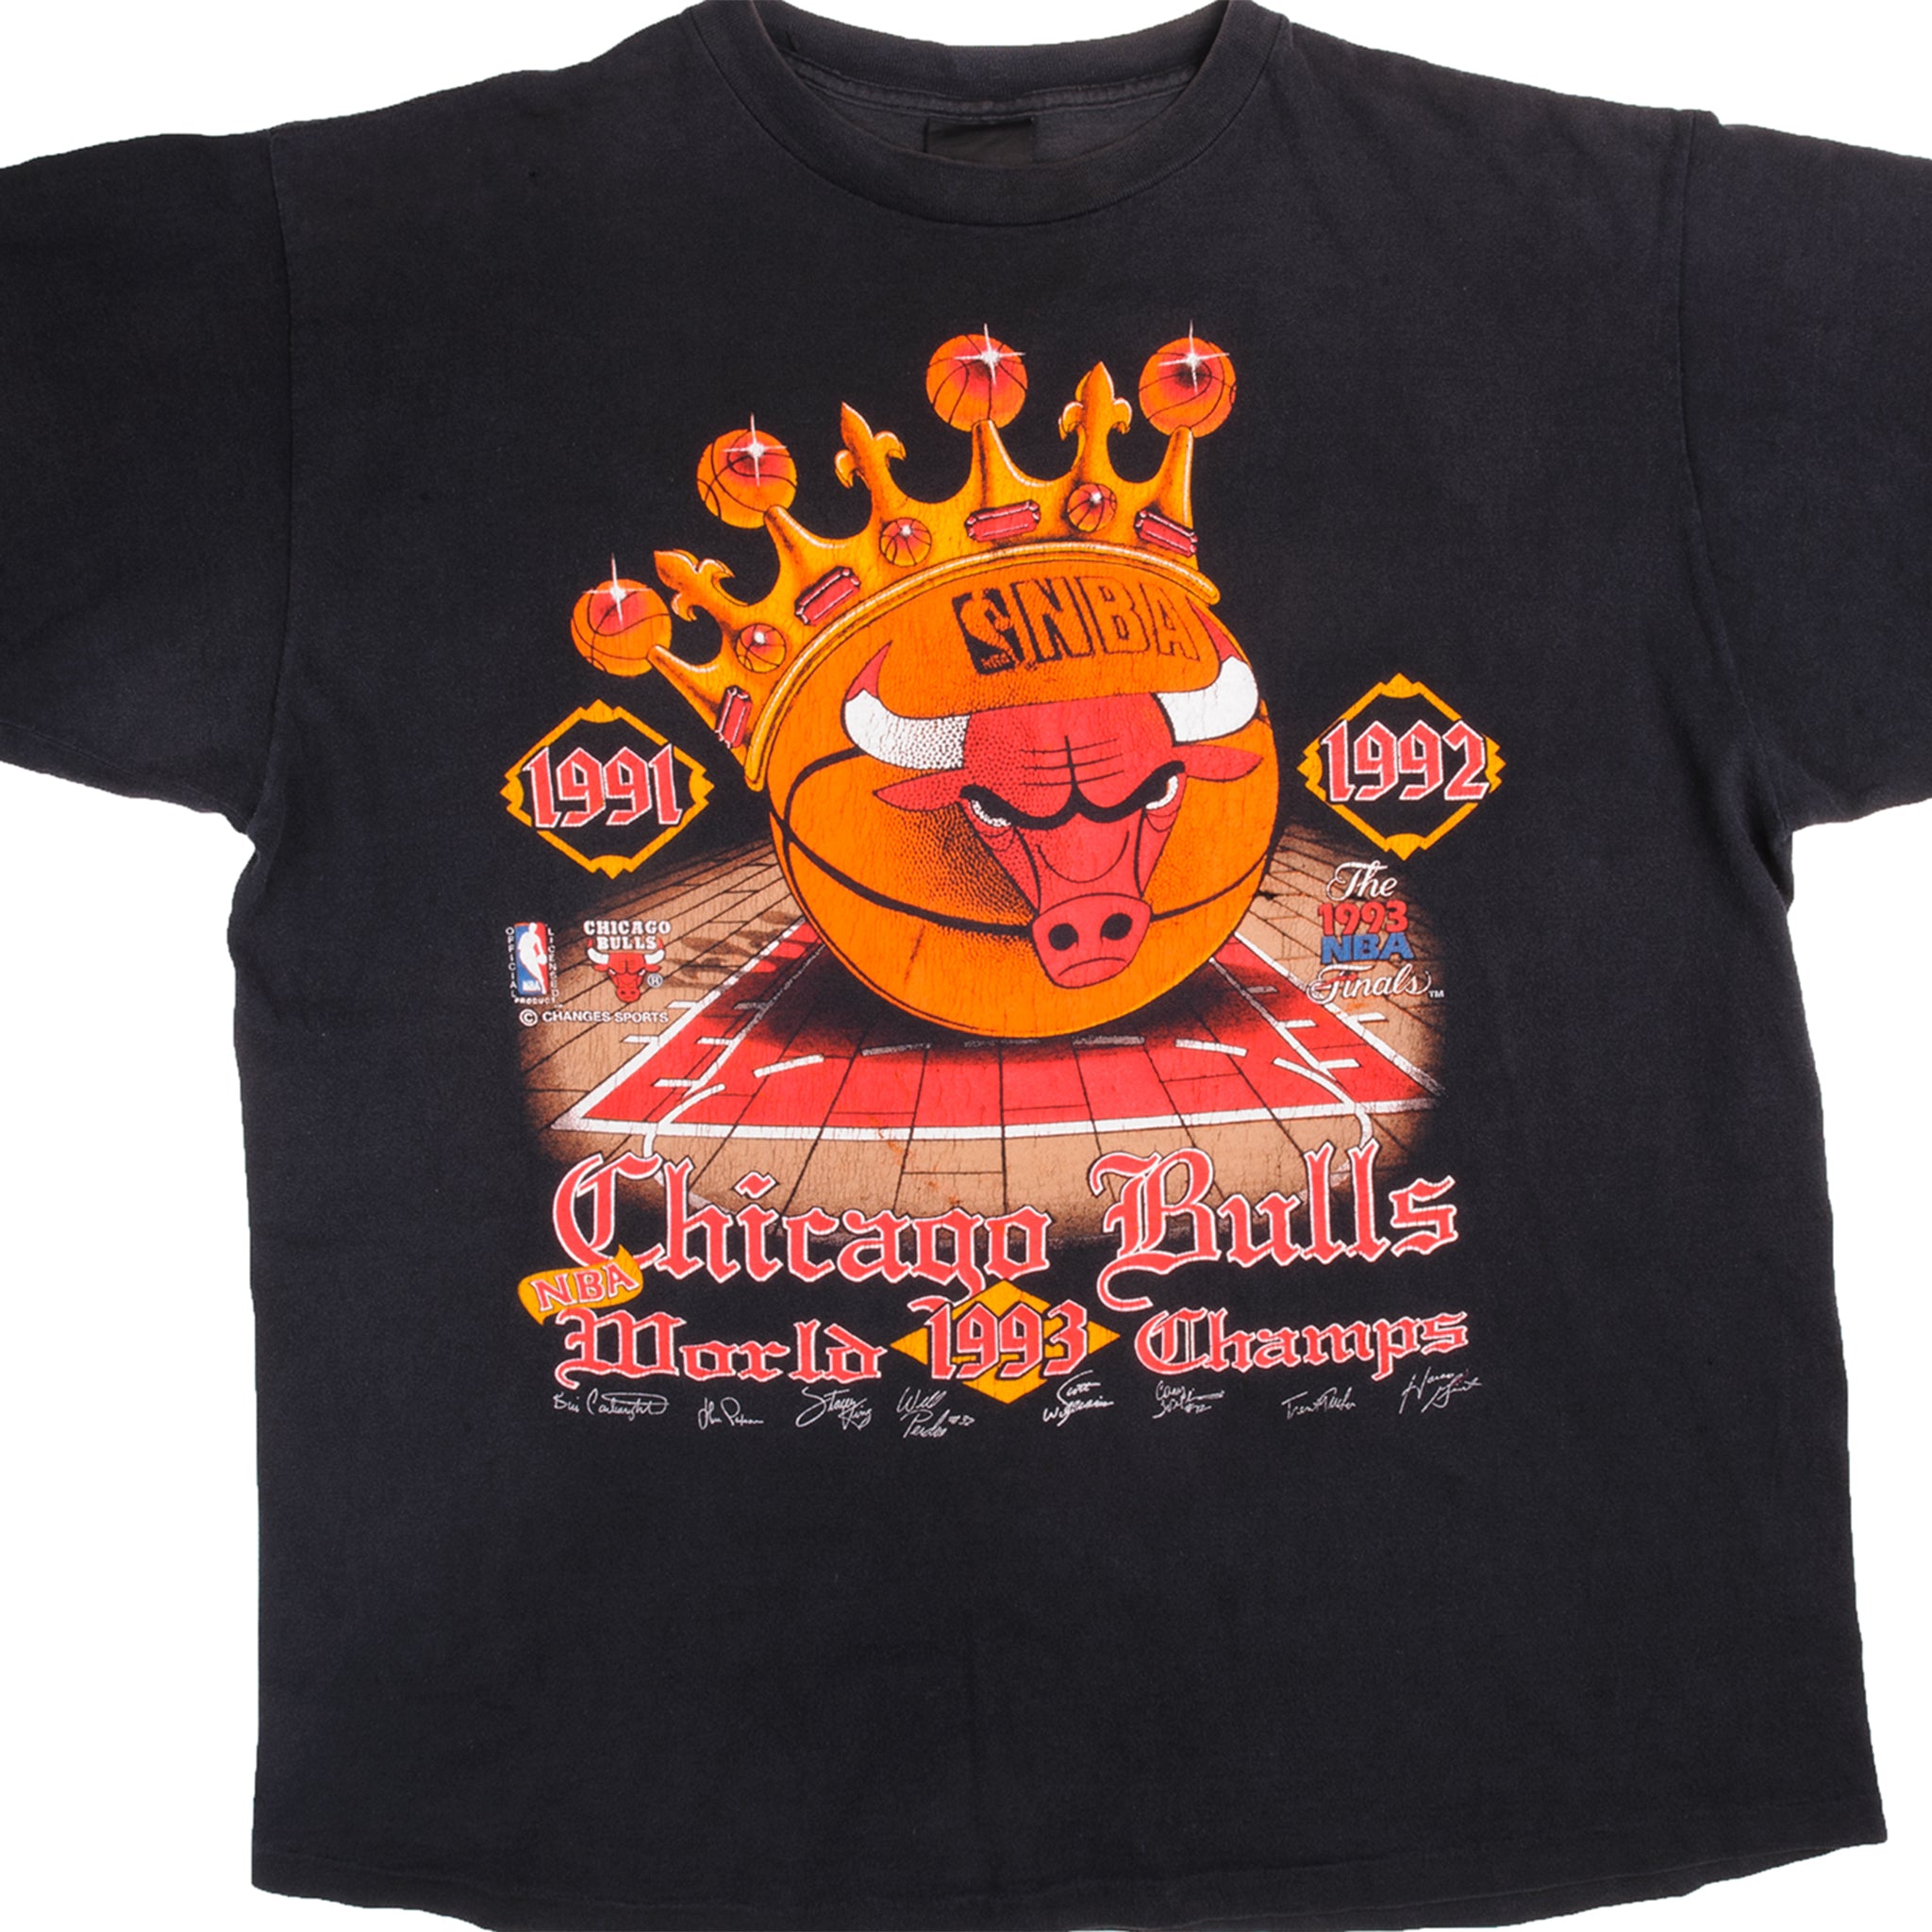 98' Chicago Bulls Six Time Champions T Shirt Size L $100 Available